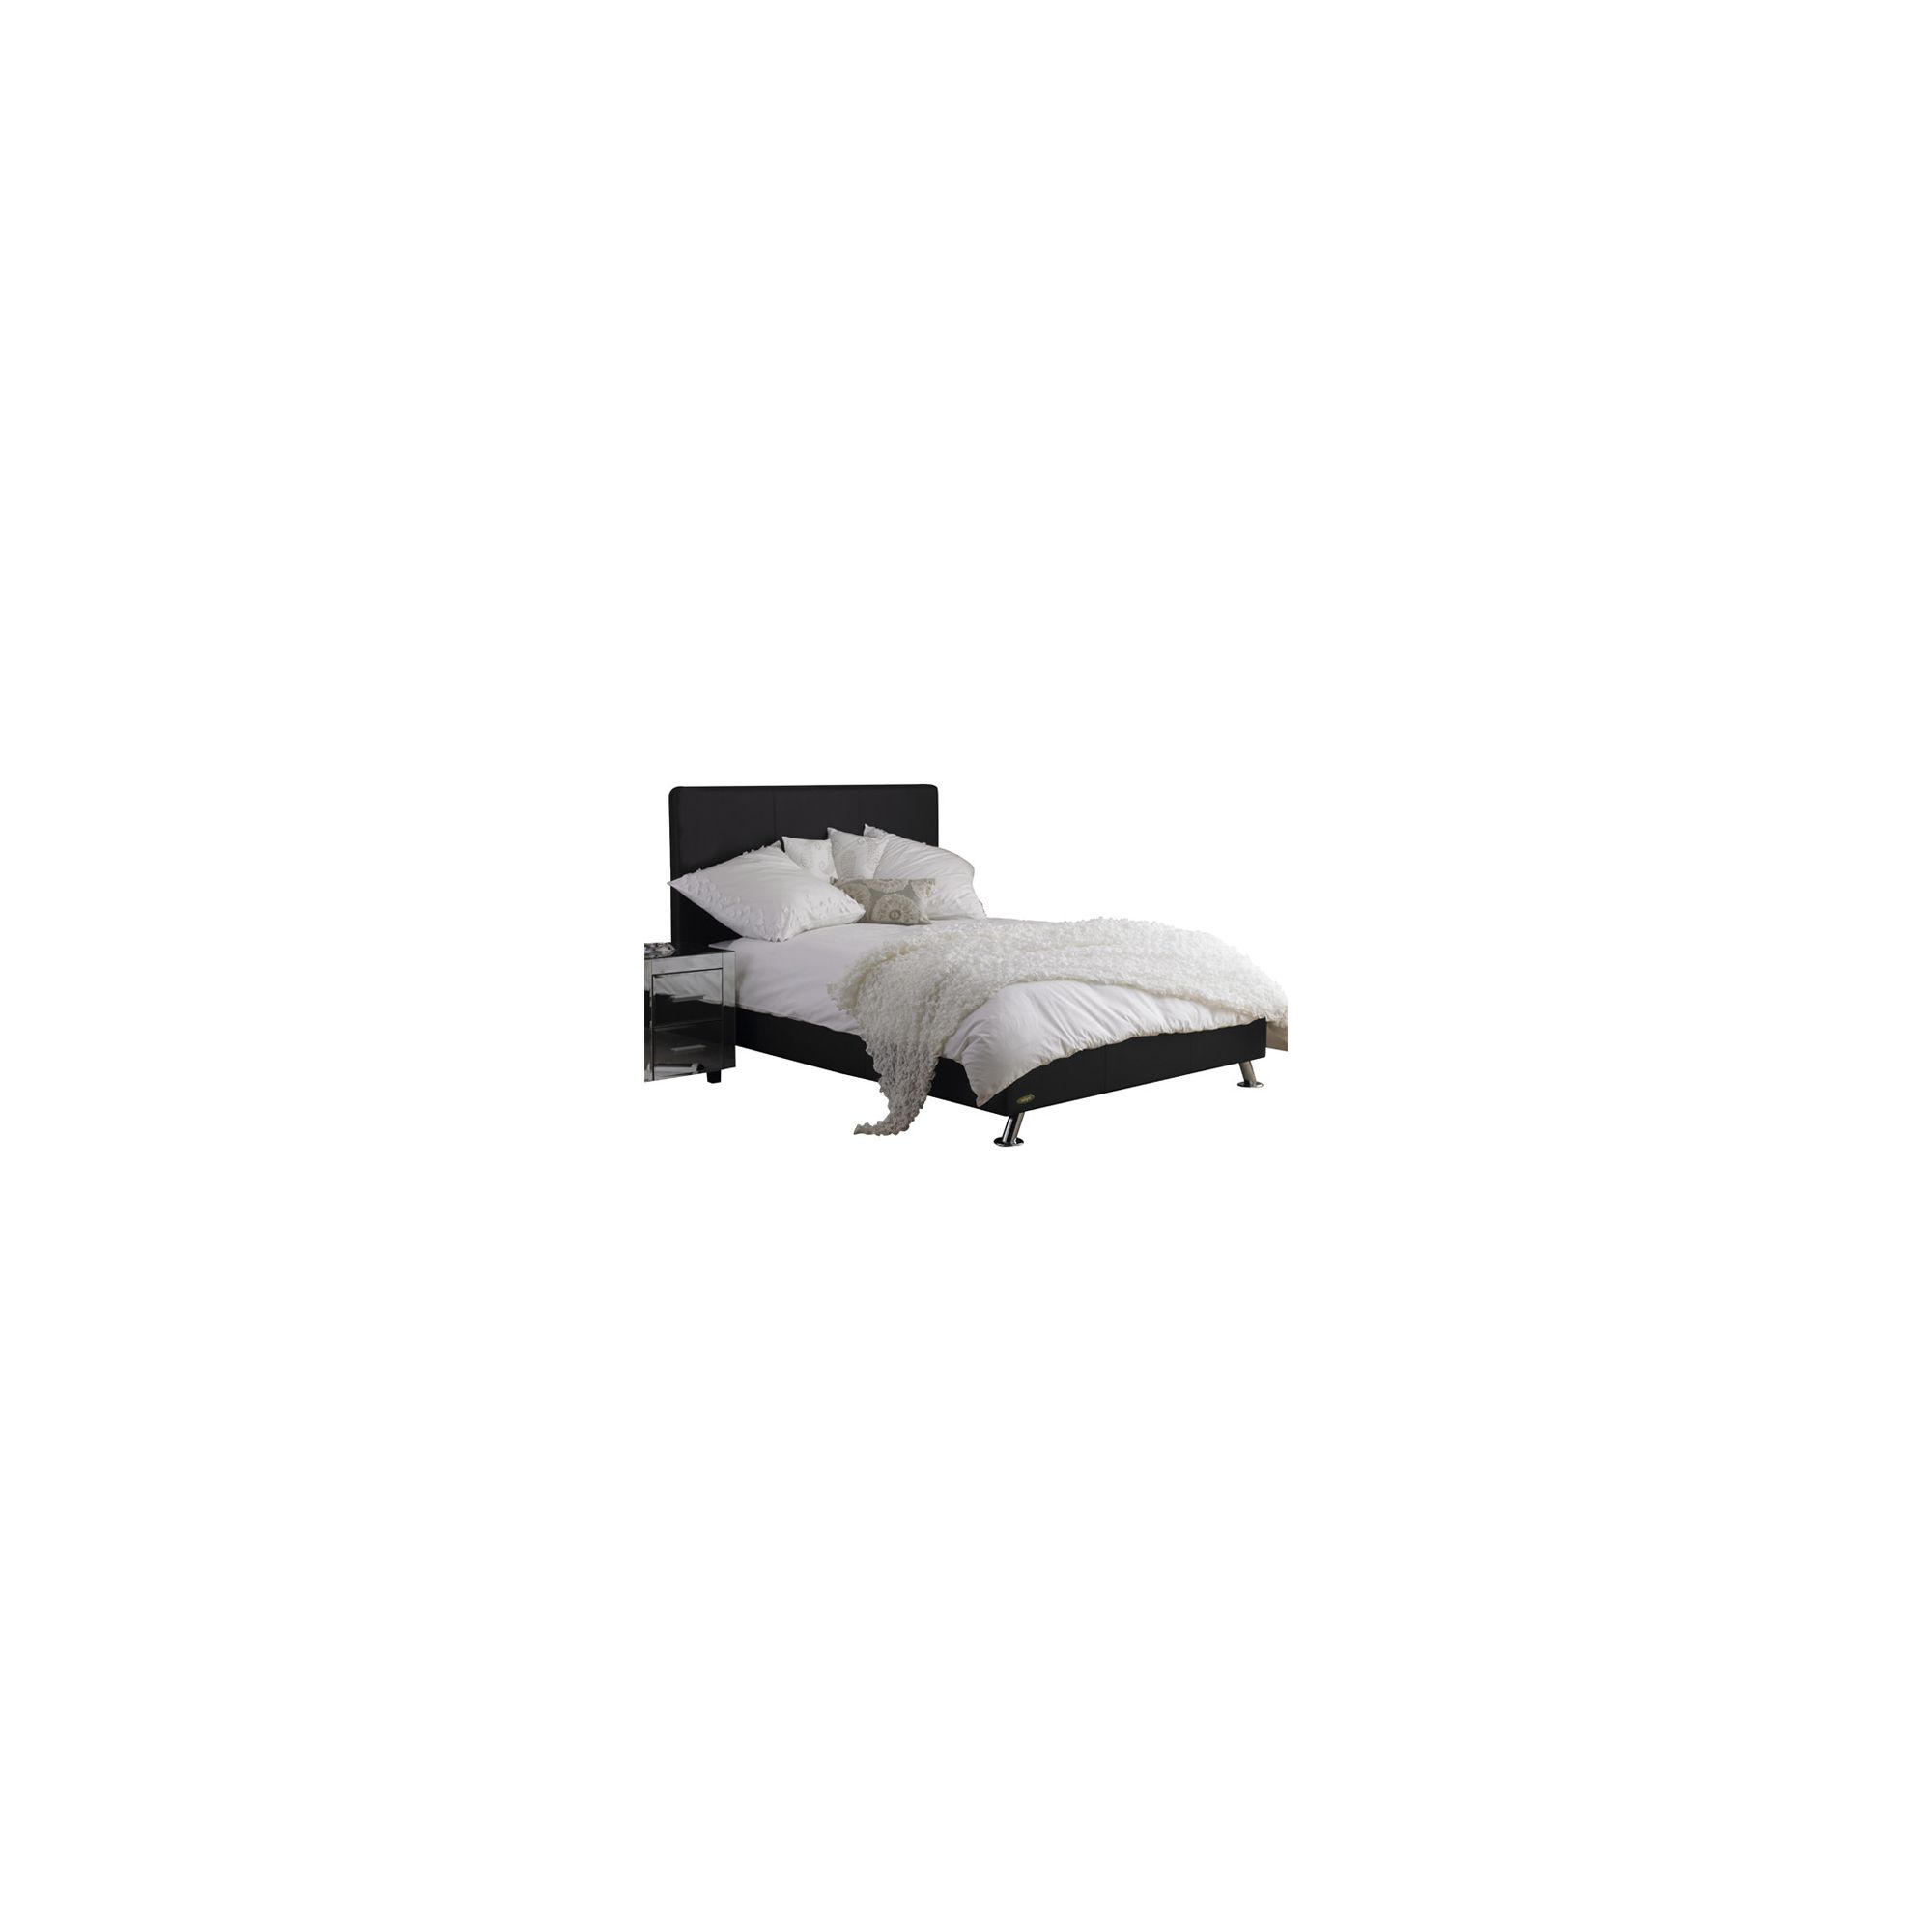 Hyder Milan Faux Leather Bed - Black - King at Tesco Direct